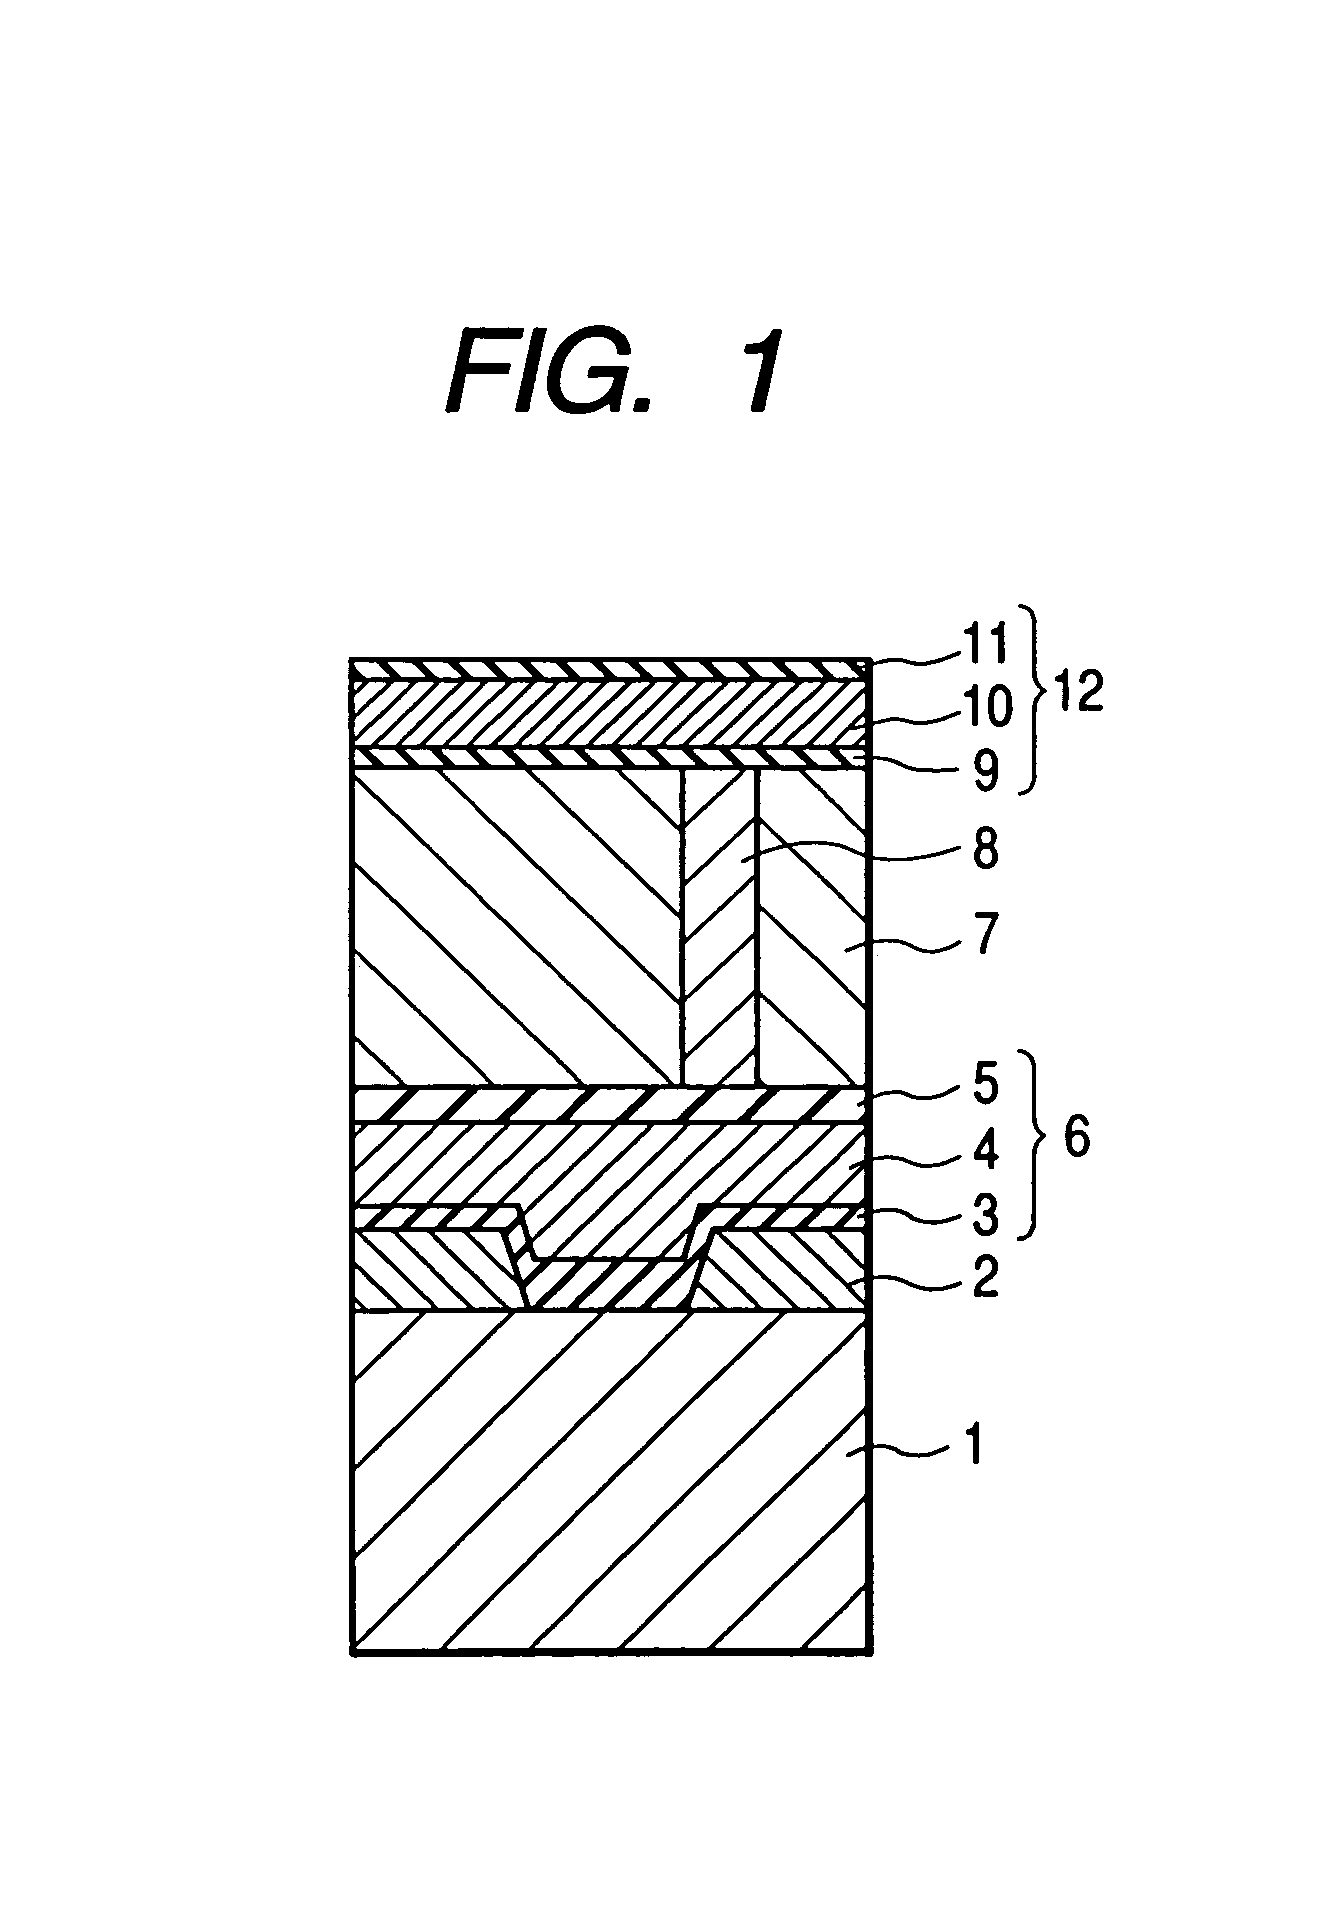 Semiconductor device with layered interconnect structure